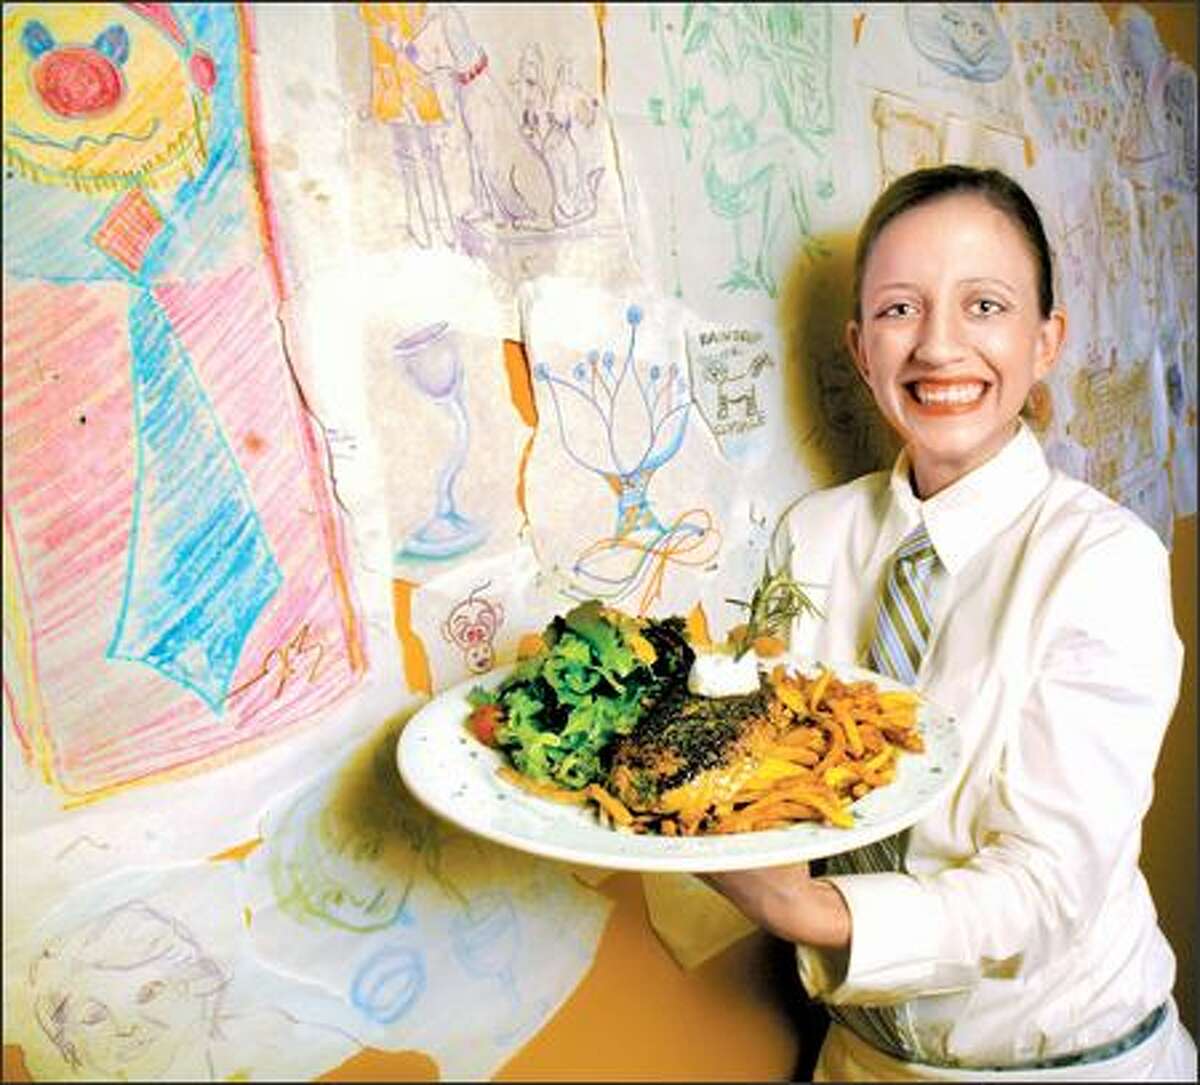 Standing next to a wall of customers' crayon art, Rachel Dreyer, a server at XO Bistro, holds a plate of steak frites with steak, salad and fries.